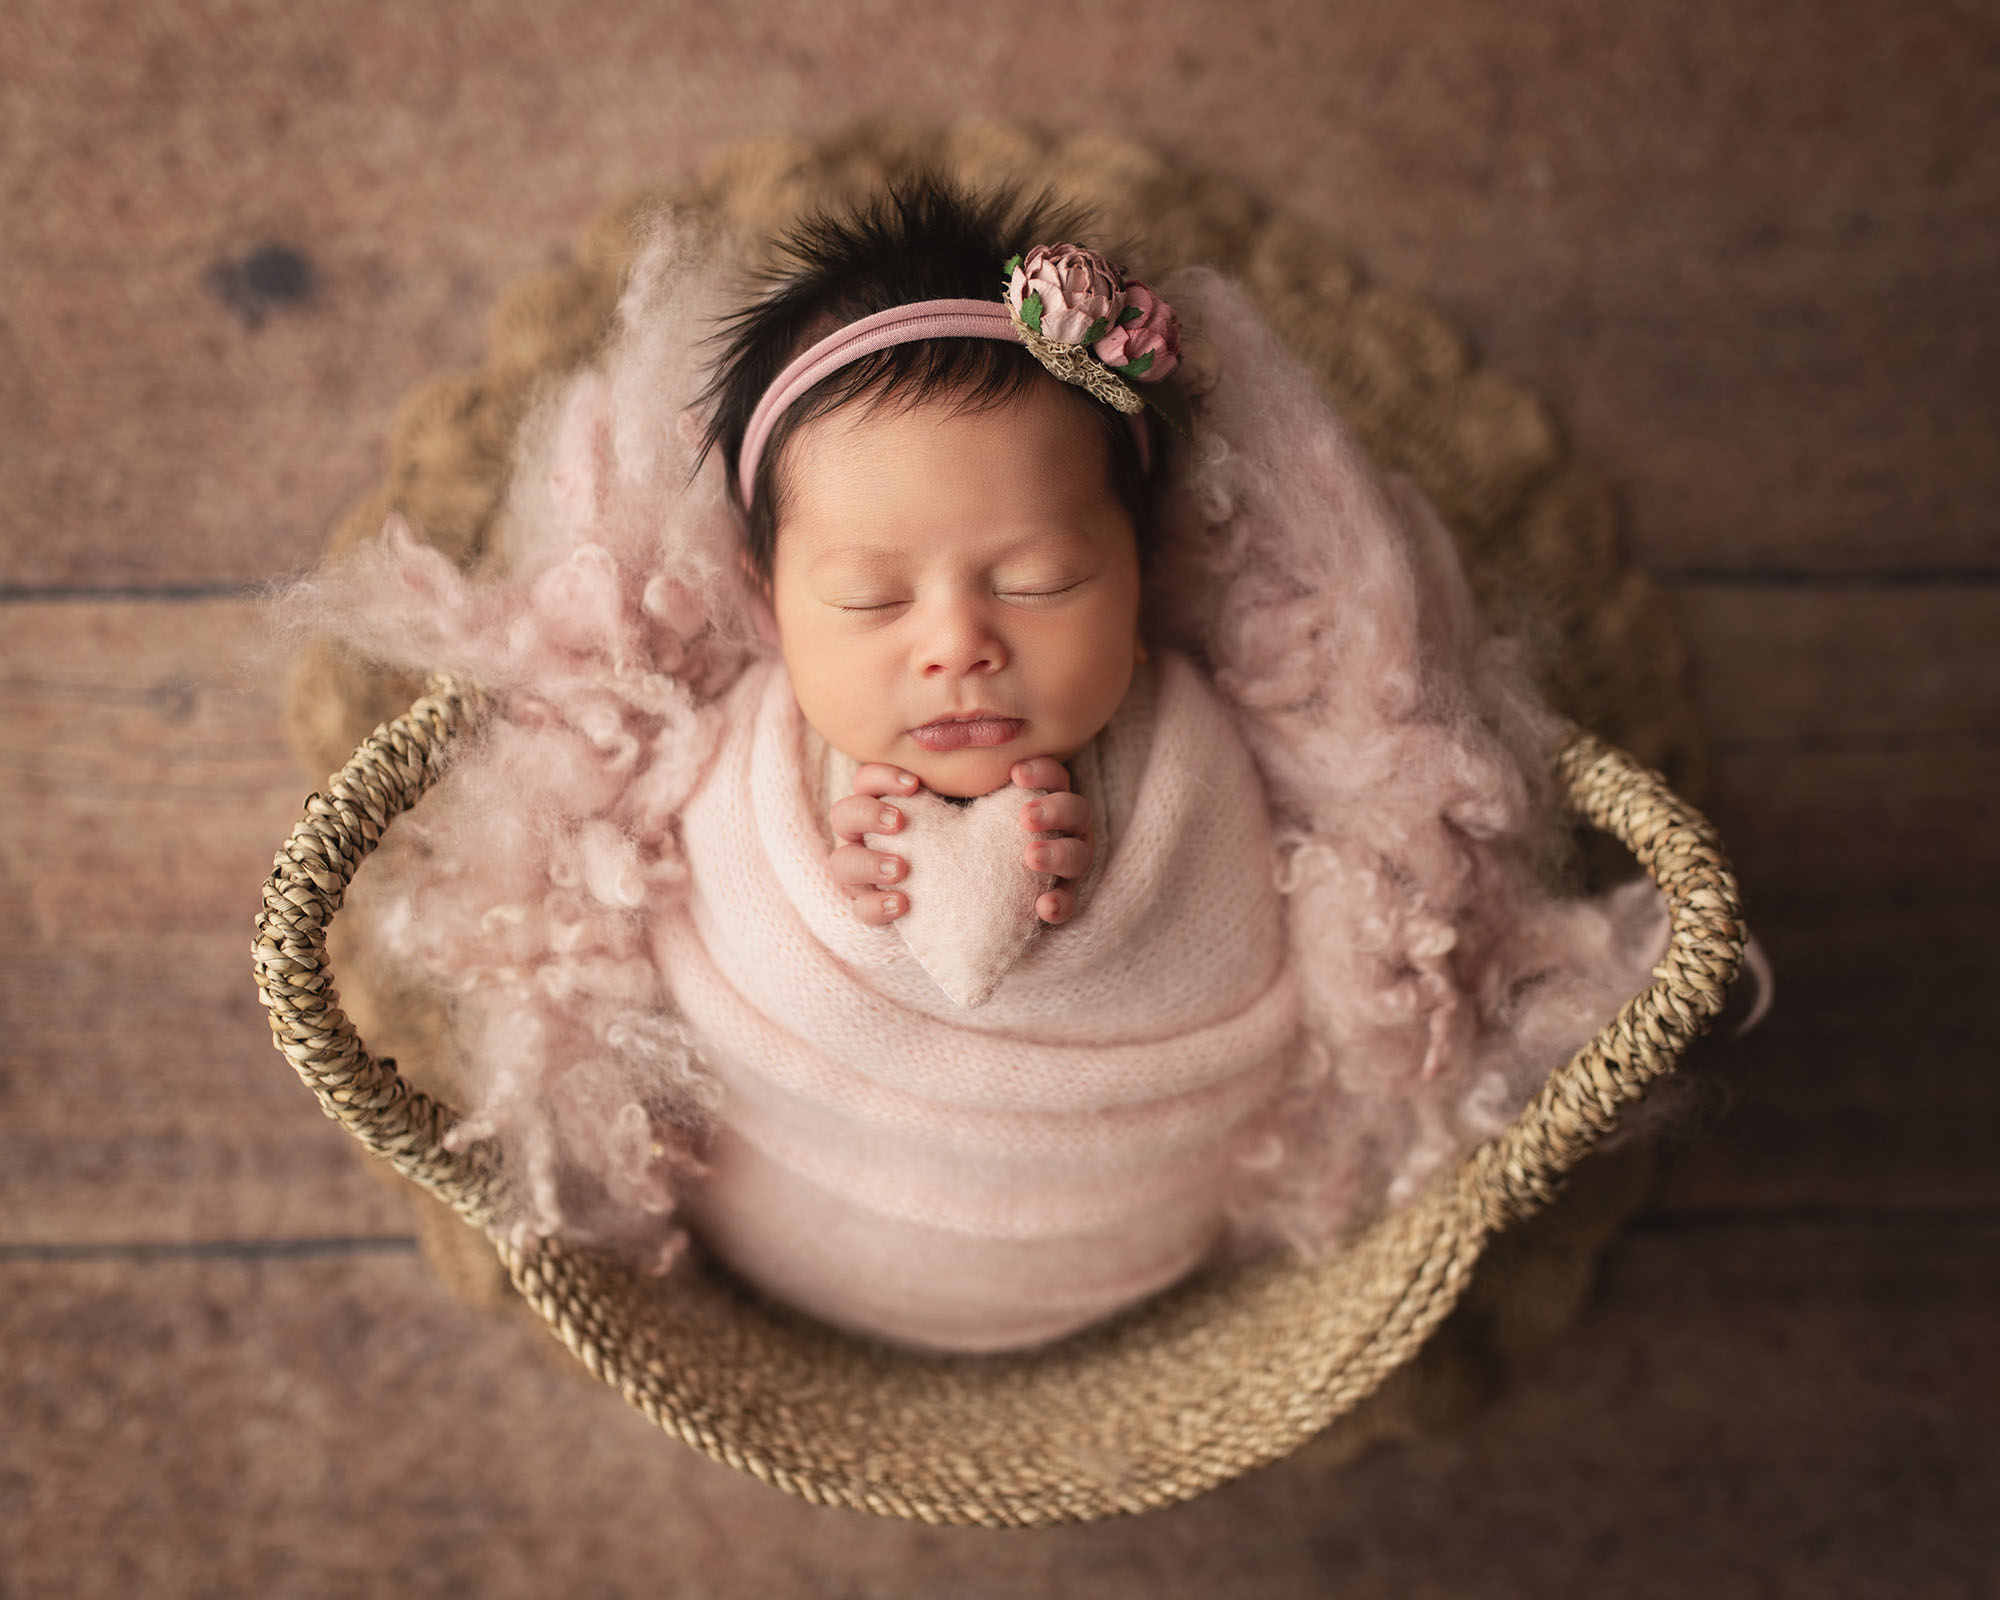 Newborn baby in a basket wrapped in pink